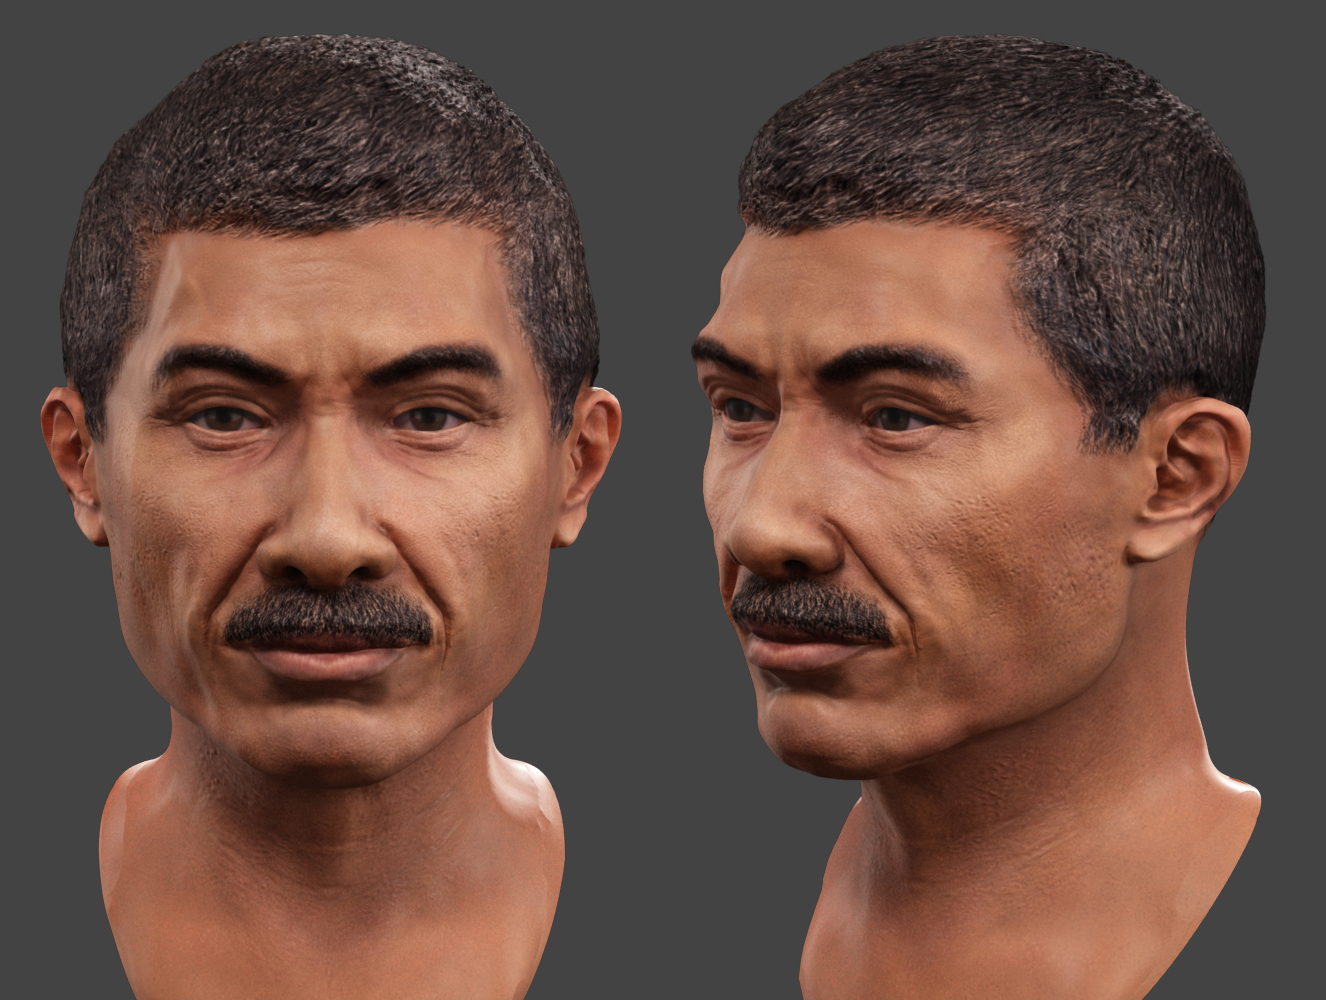 Male Southeast Asian 3D character head